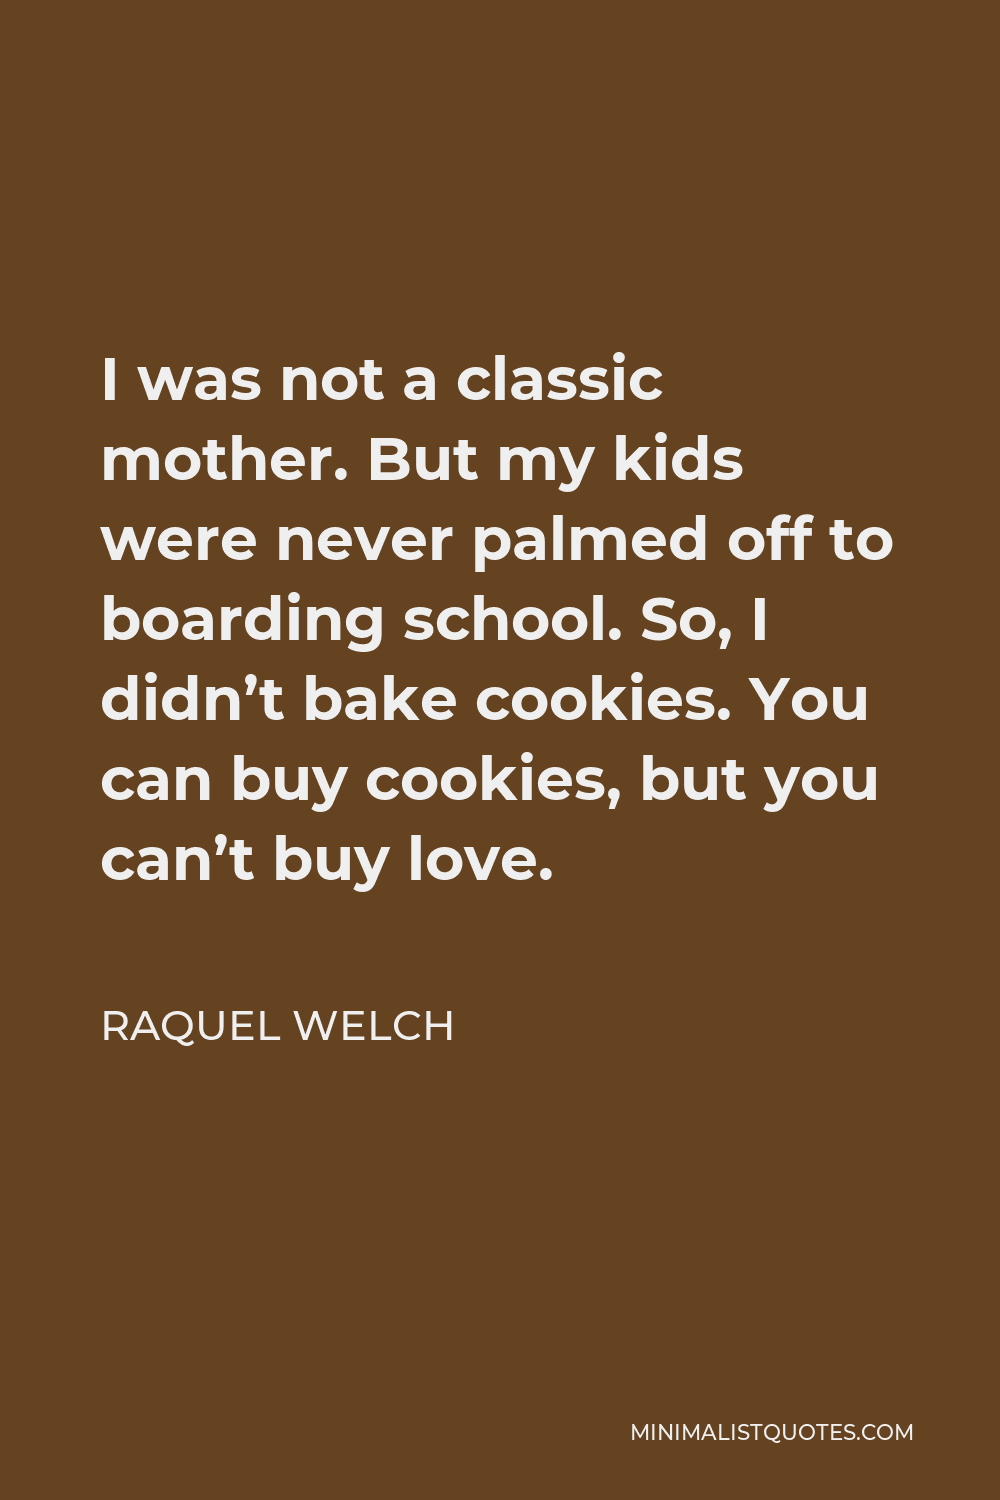 Raquel Welch Quote - I was not a classic mother. But my kids were never palmed off to boarding school. So, I didn’t bake cookies. You can buy cookies, but you can’t buy love.